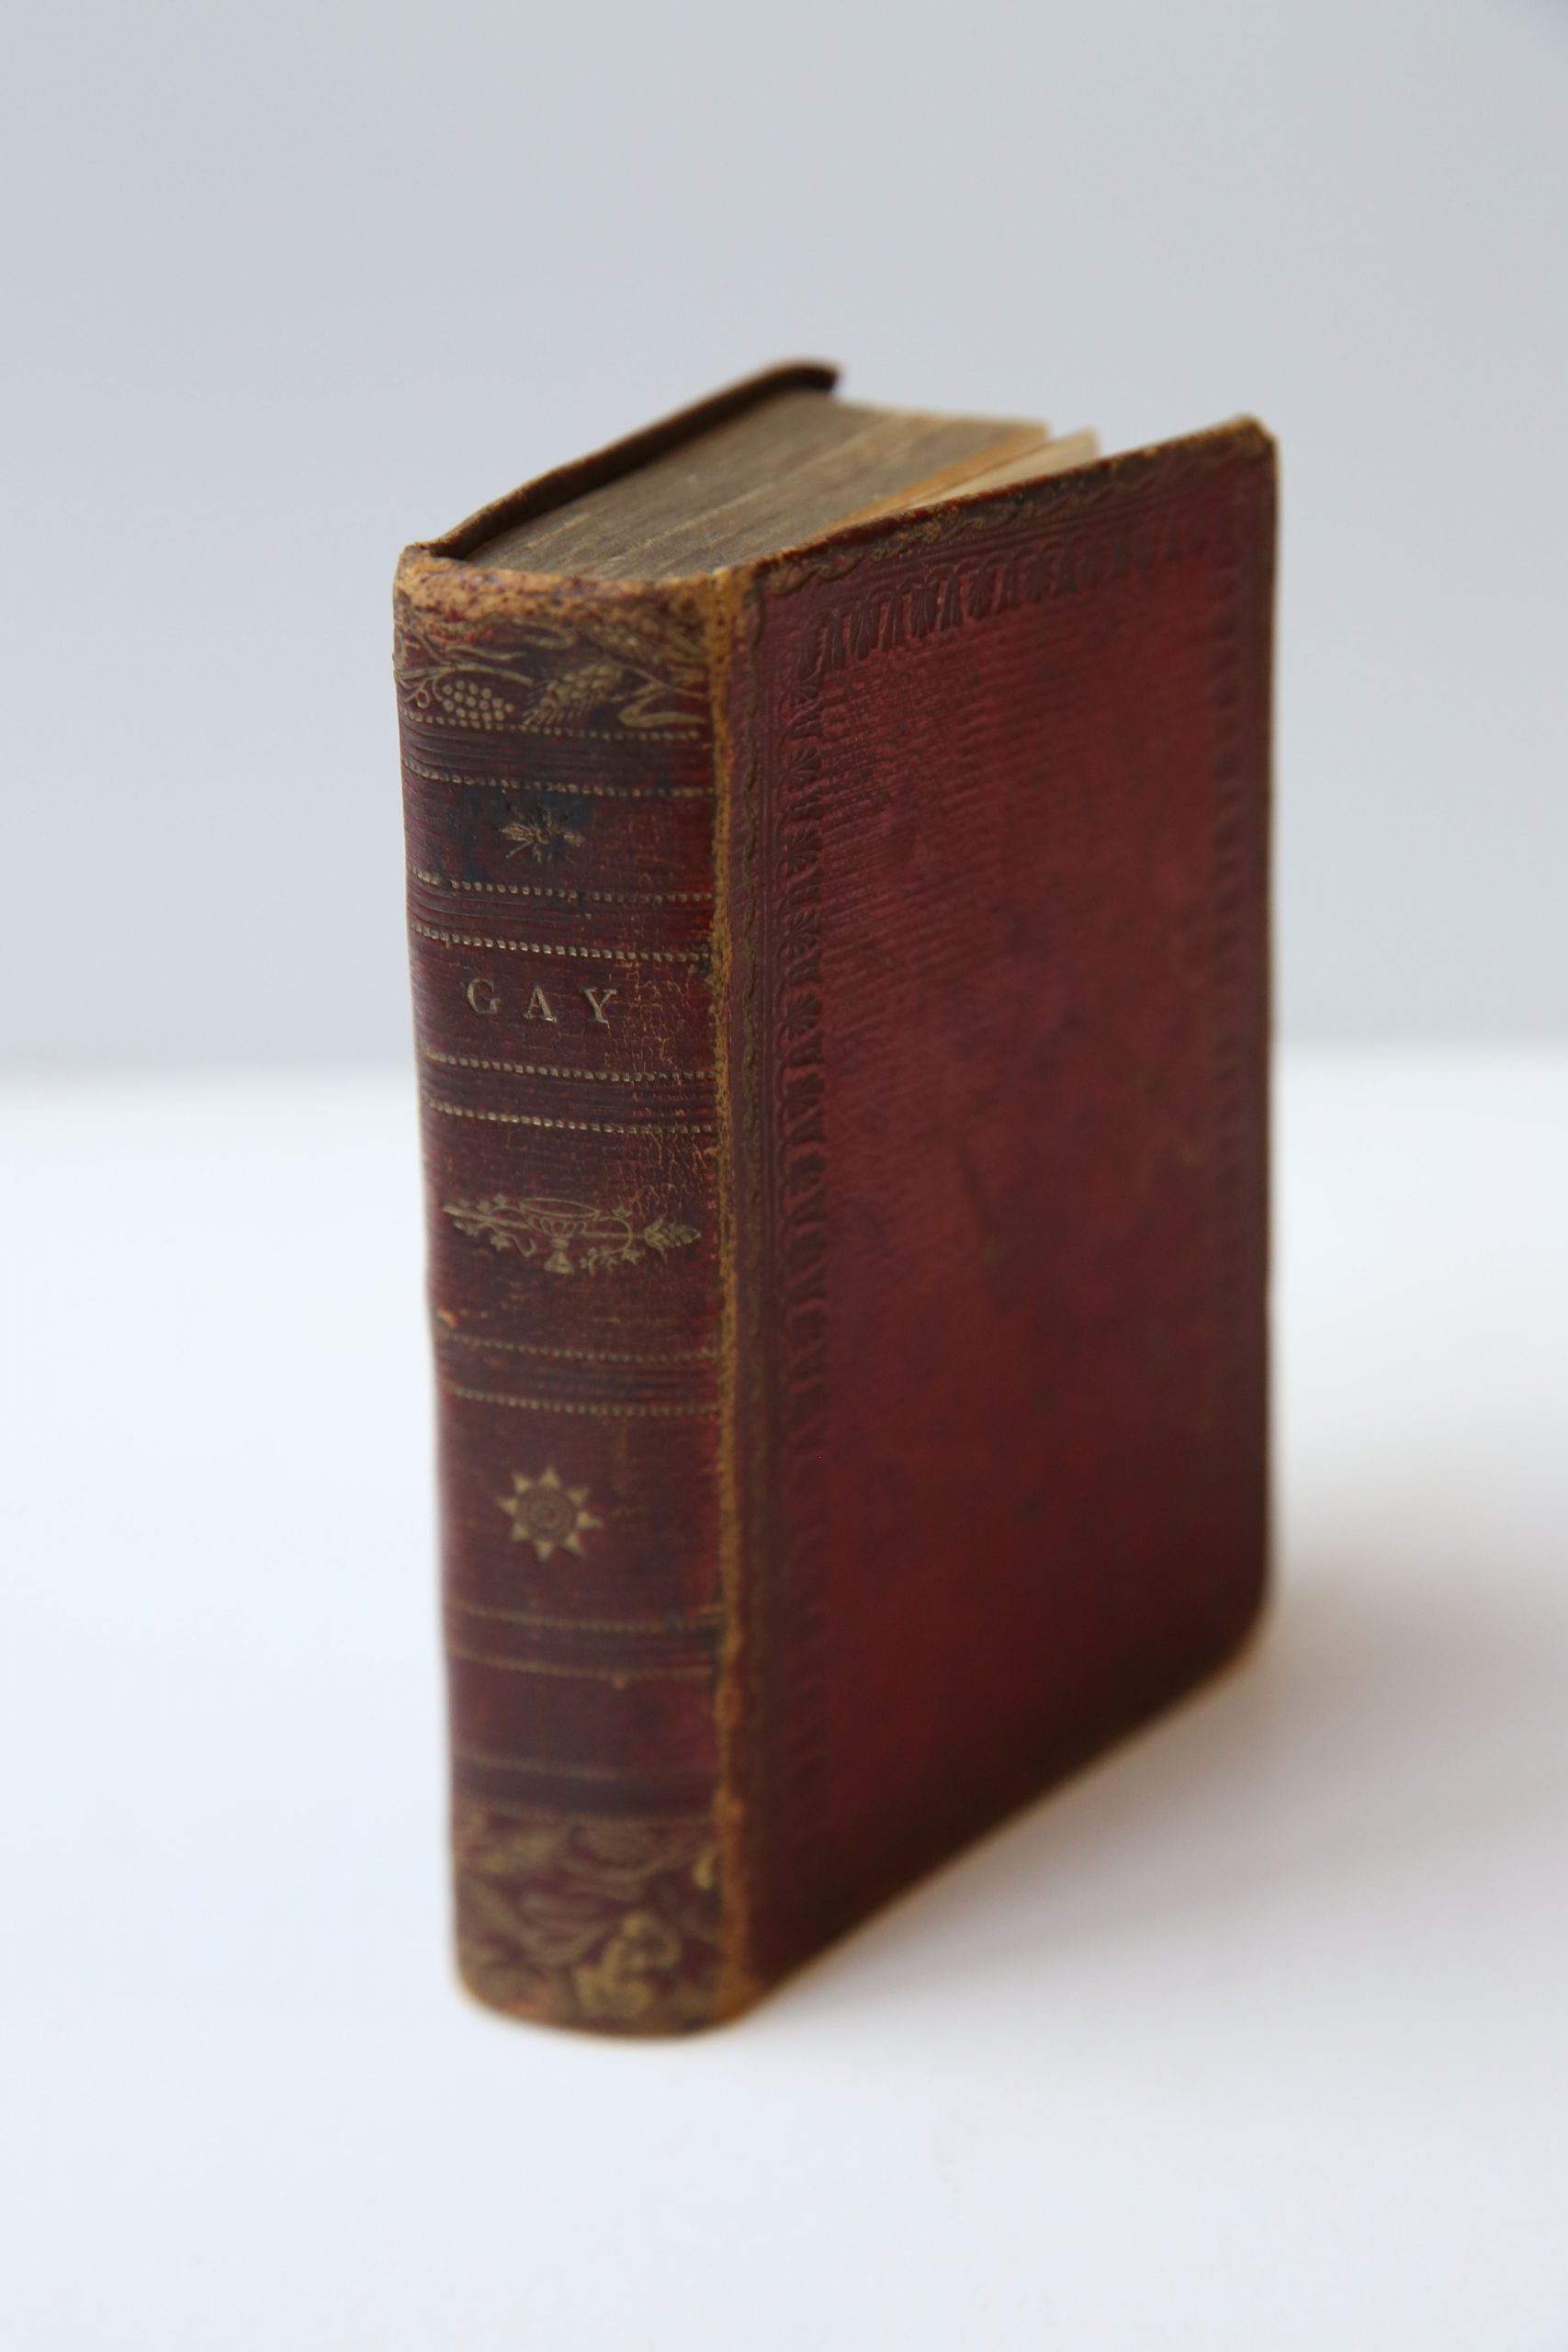 The poetical works of John Gay, London, published by Suttaby, Evance & fox, and Crosby & co. Stationers Court 1811, 371 pp.